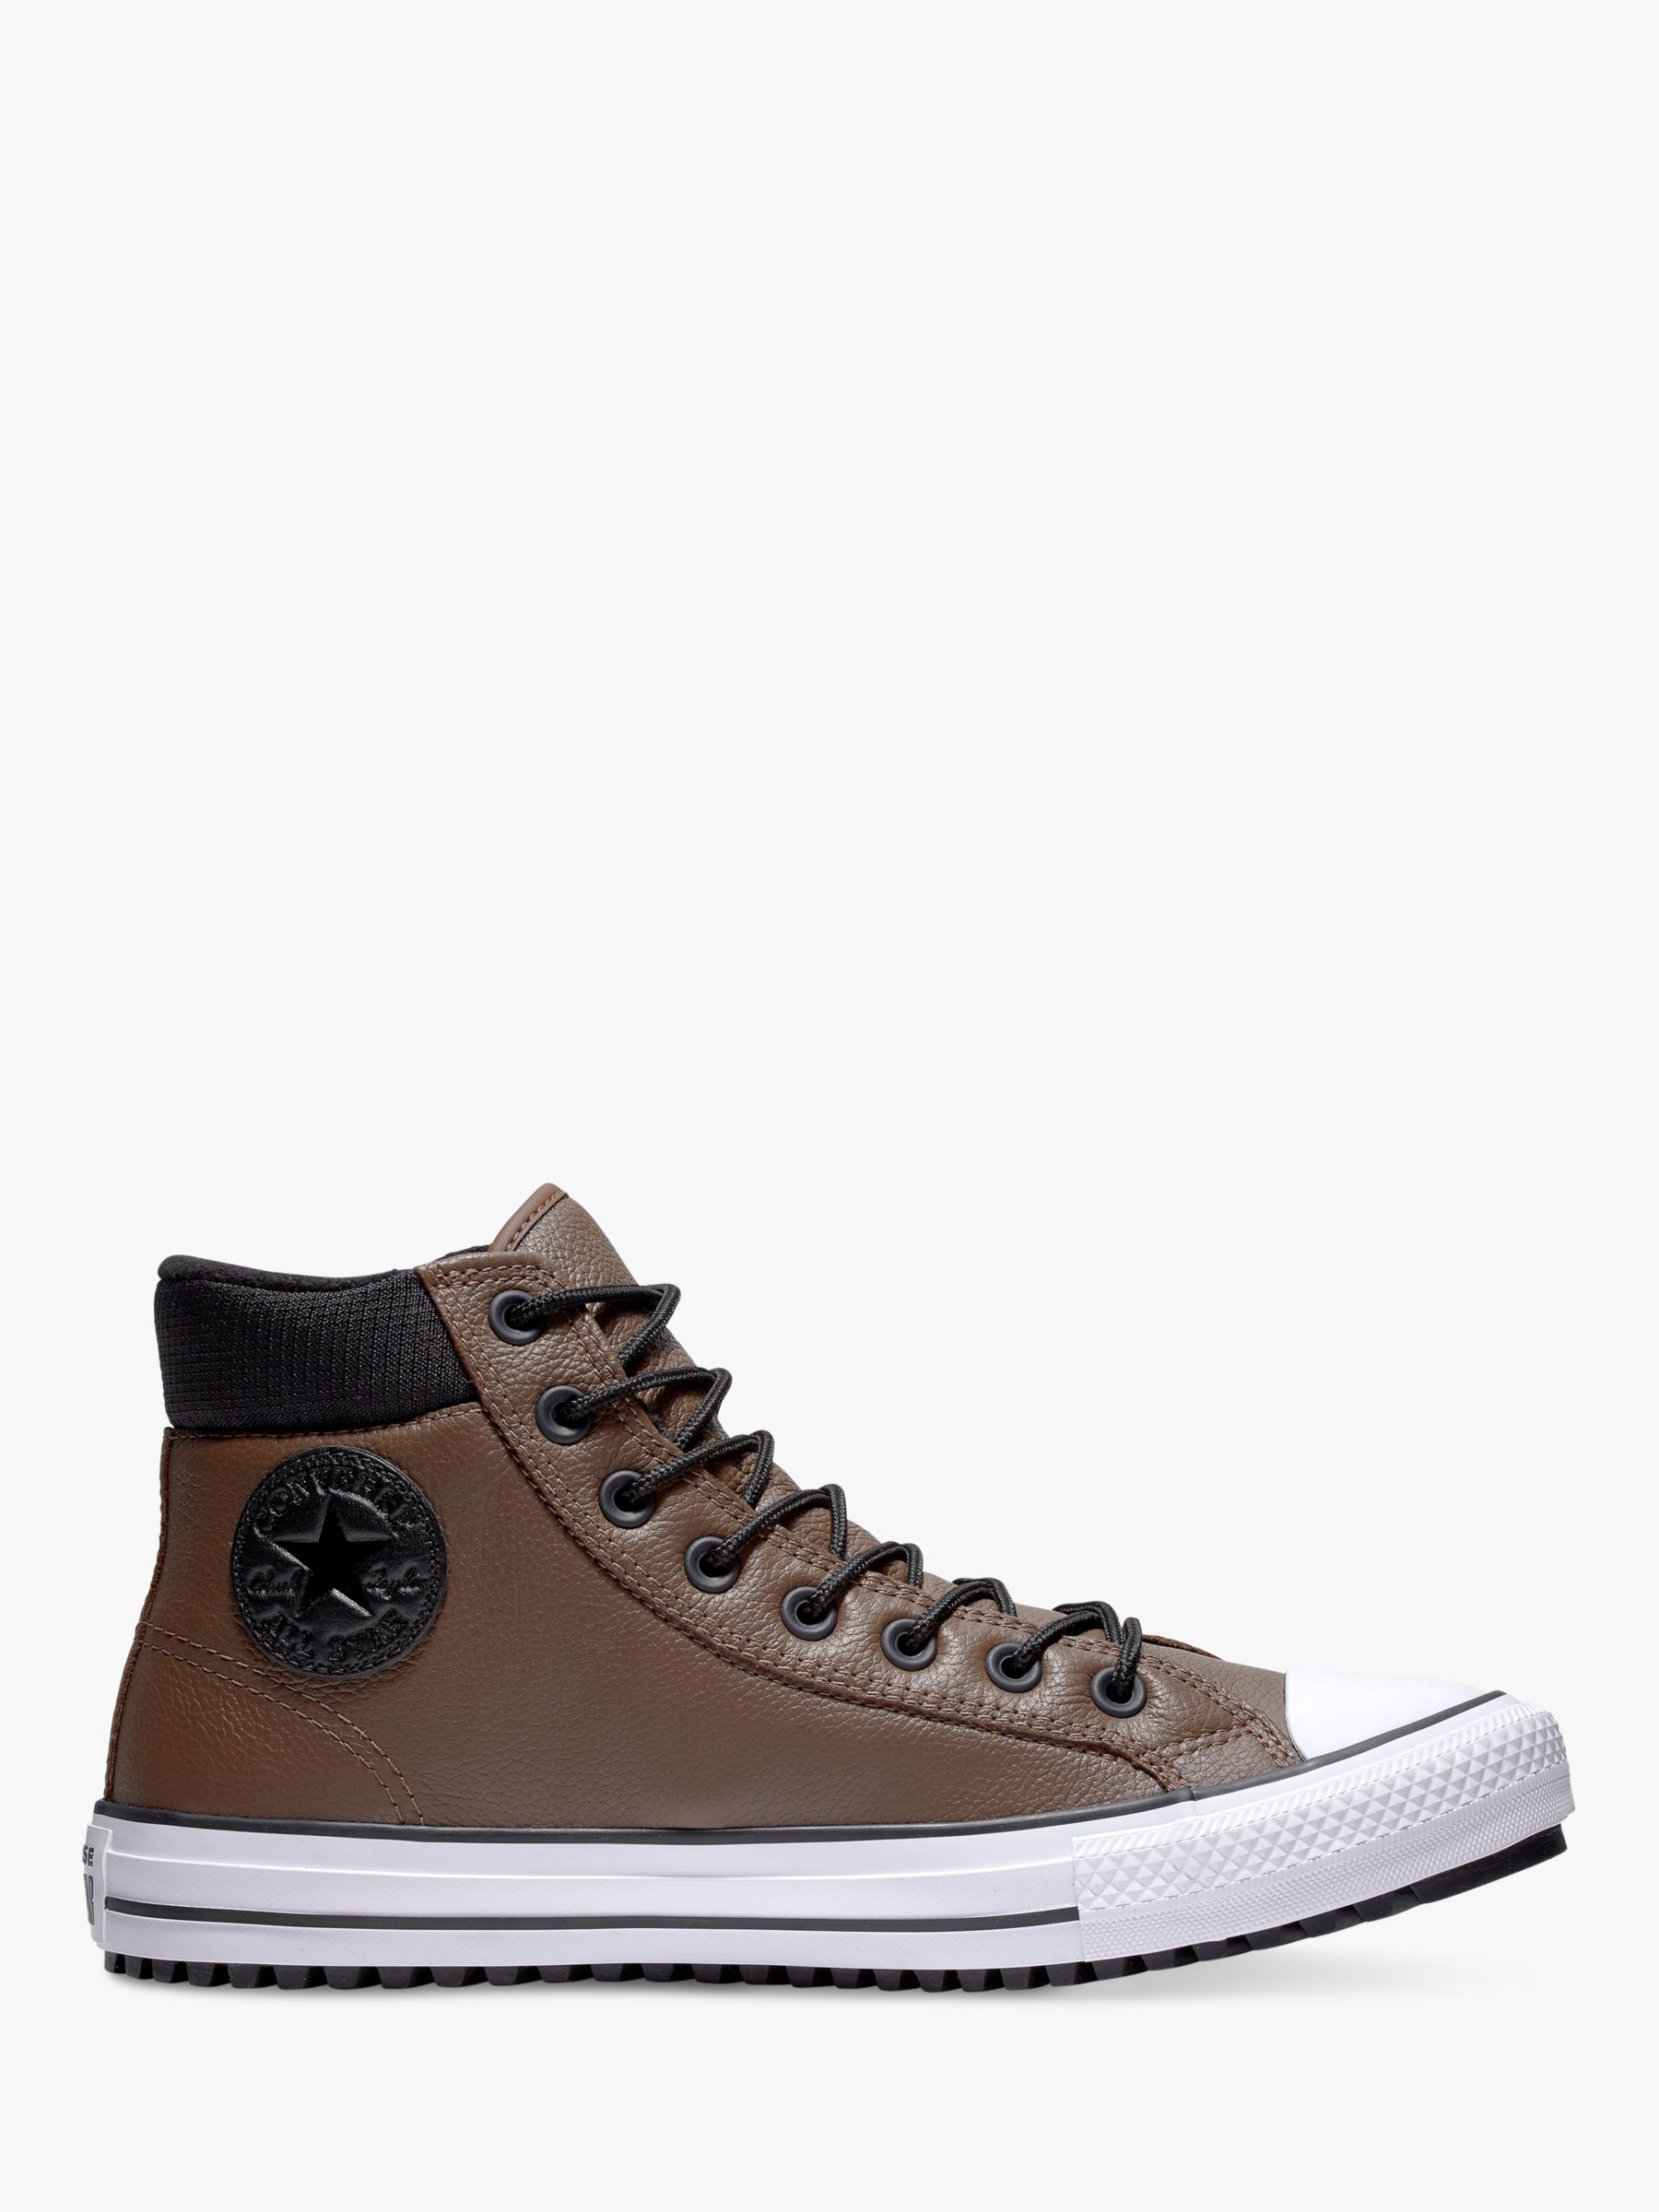 converse chuck taylor chocolate leather